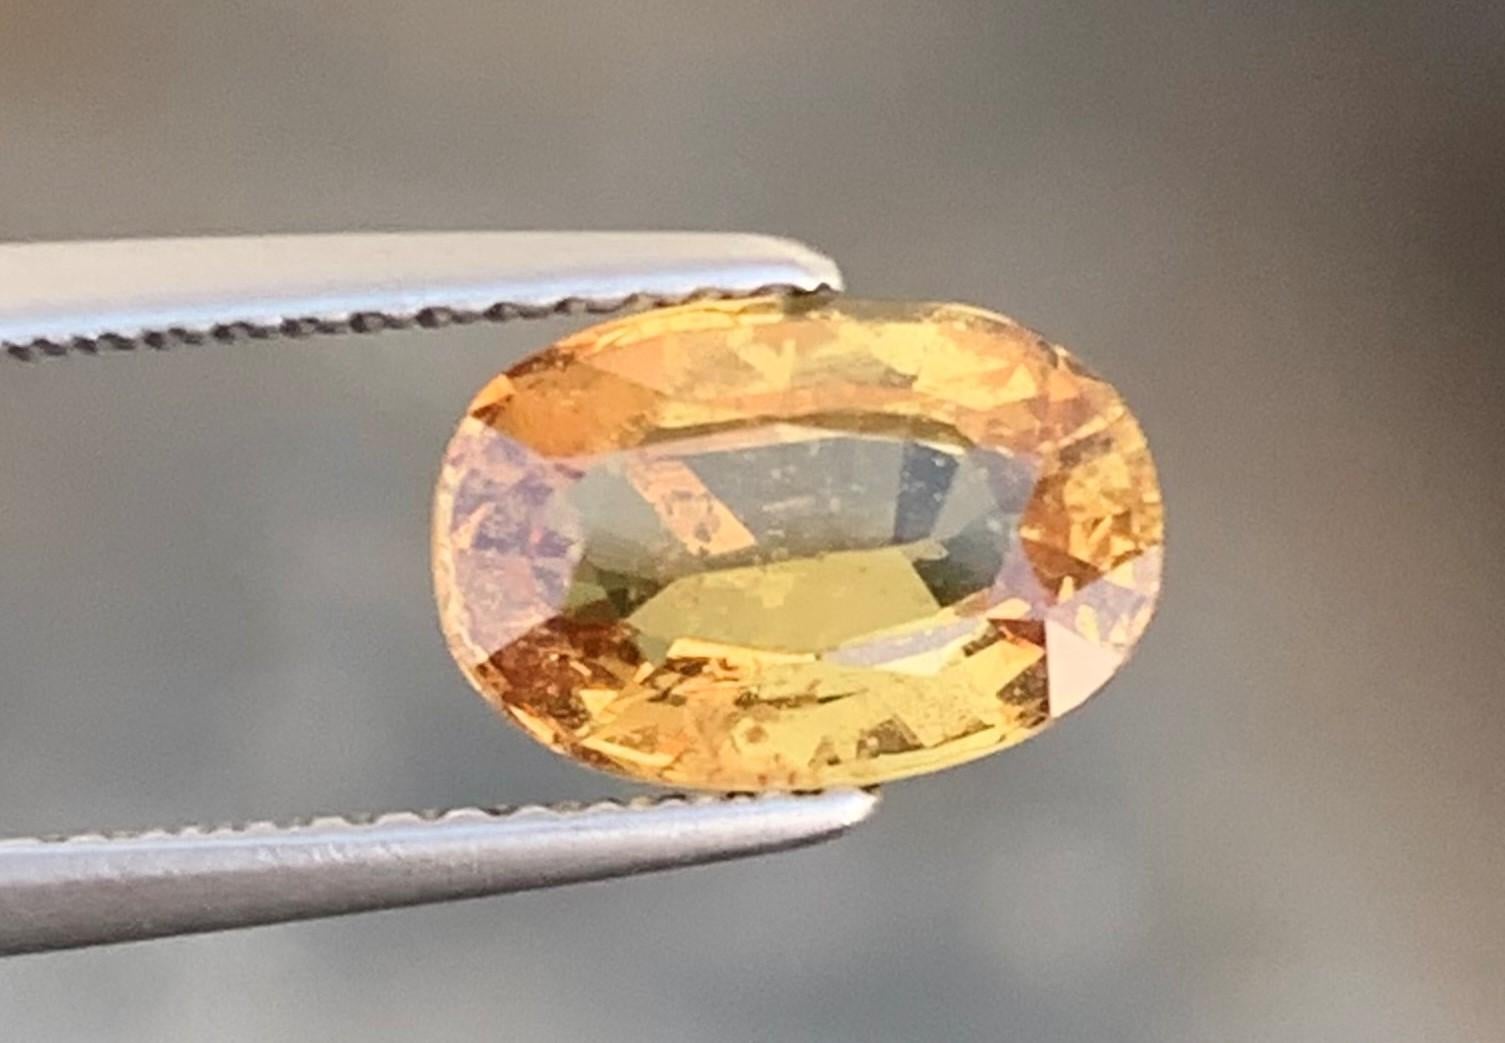 Arts and Crafts 2.10 Carat Si Clarity Natural Loose Yellow Sapphire Gemstone with Oval Shape (Saphir jaune en vrac de forme ovale) en vente